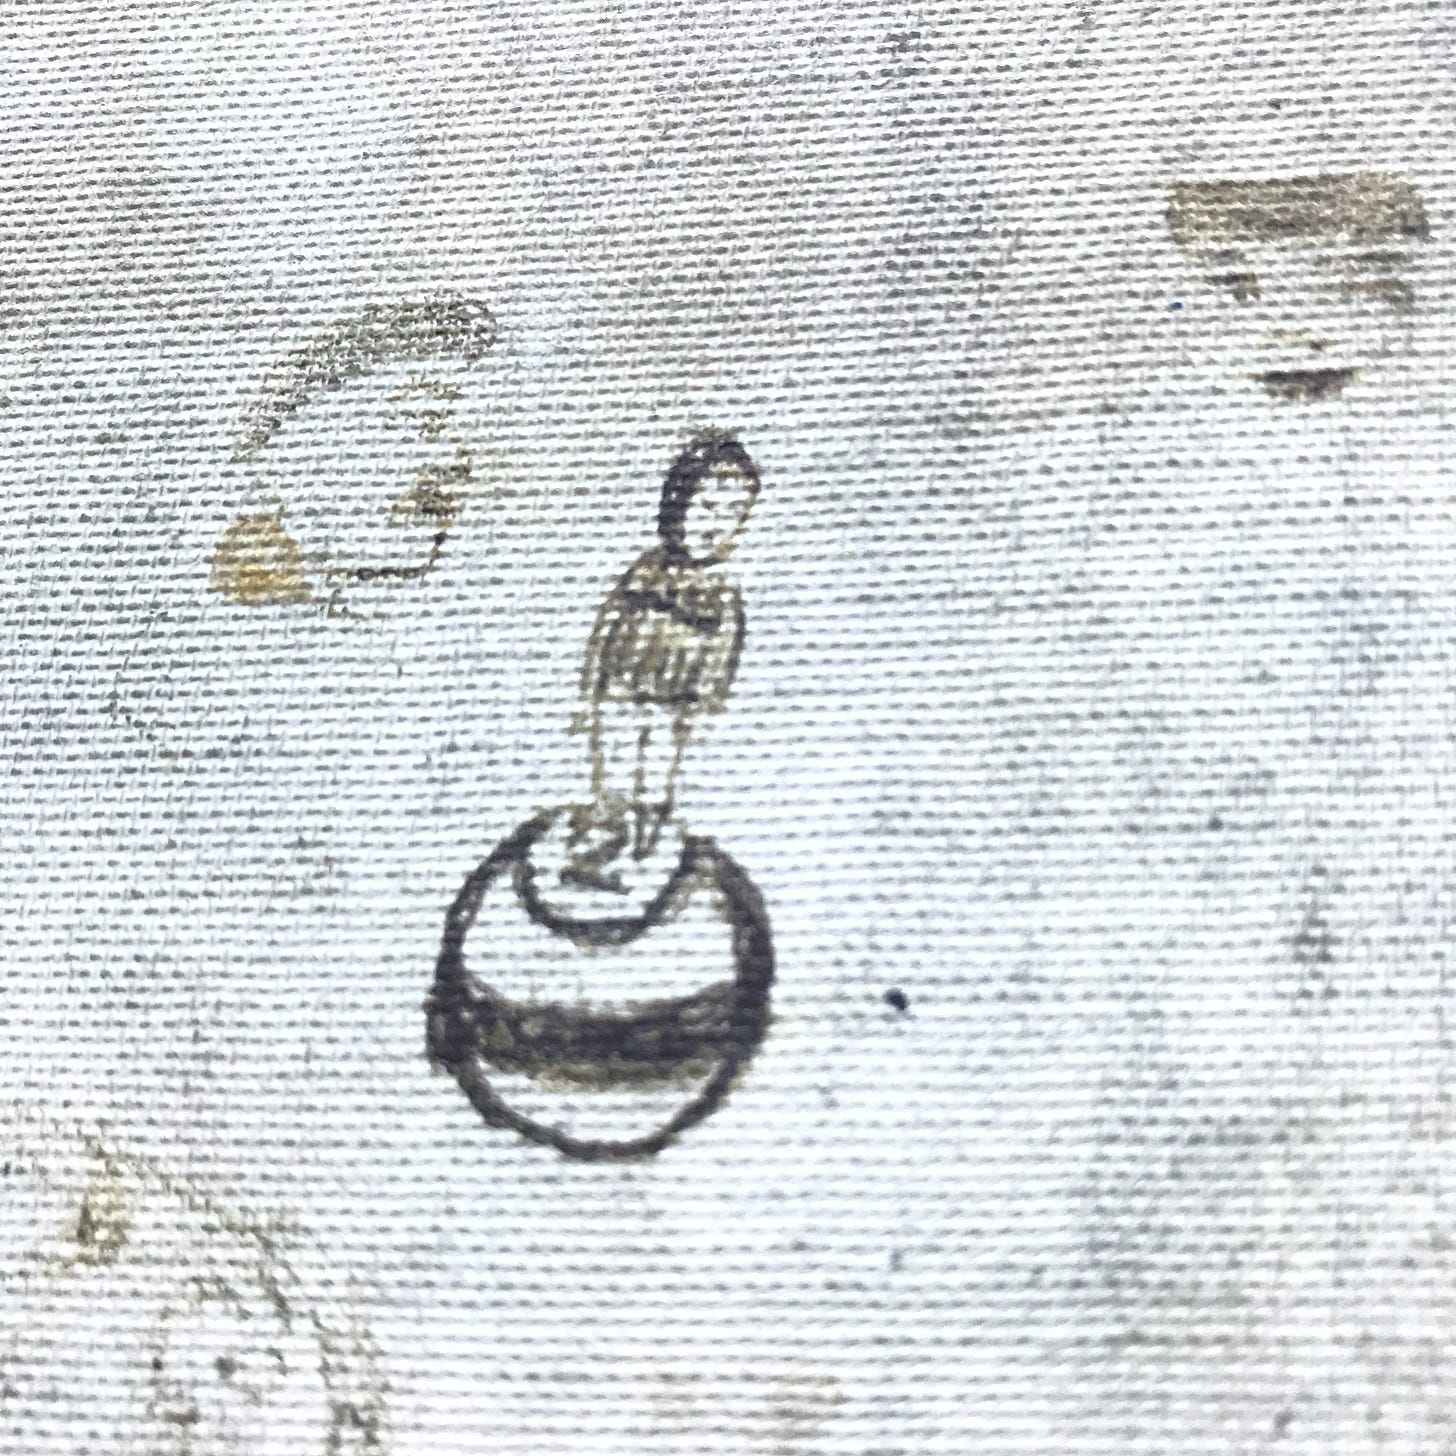 detail of drawing from the cover of Faux Jean's journal depicting a hooded kid standing on a planet resembling a 2-ball from pool.